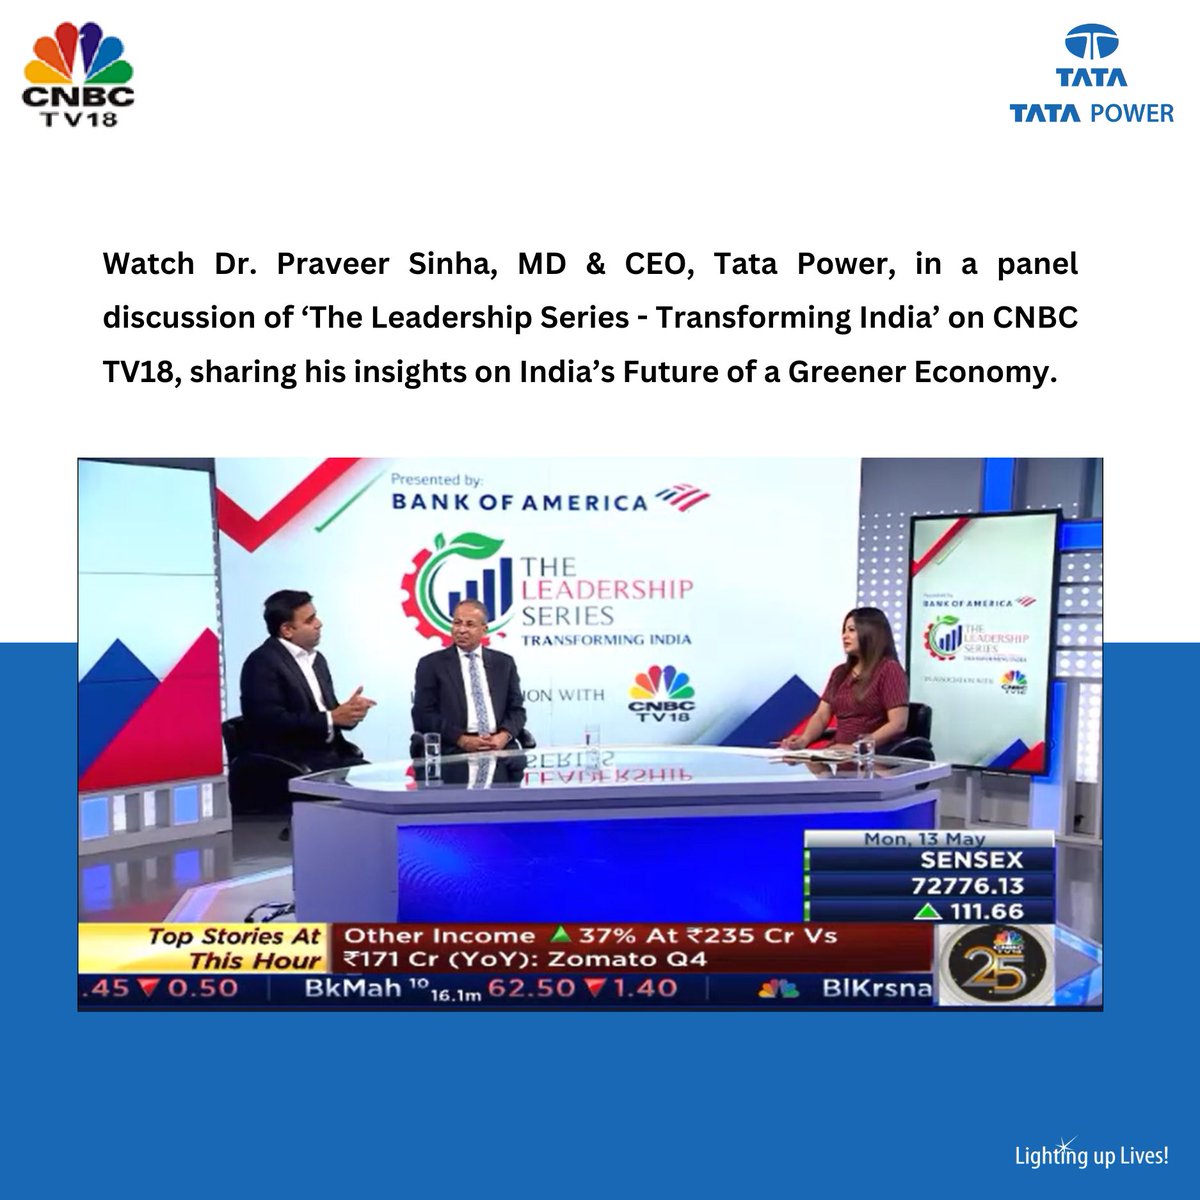 Dr Praveer Sinha, CEO & MD of Tata Power, shared his insights on India’s Future of a Greener Economy on CNBC TV18’s ‘The Leadership Series - Transforming India’ alongside Mr. Ankur Thadani, Partner at TPG, and Mr. Gaurav Singhal, Co-Head of Energy Transition Investment Banking at